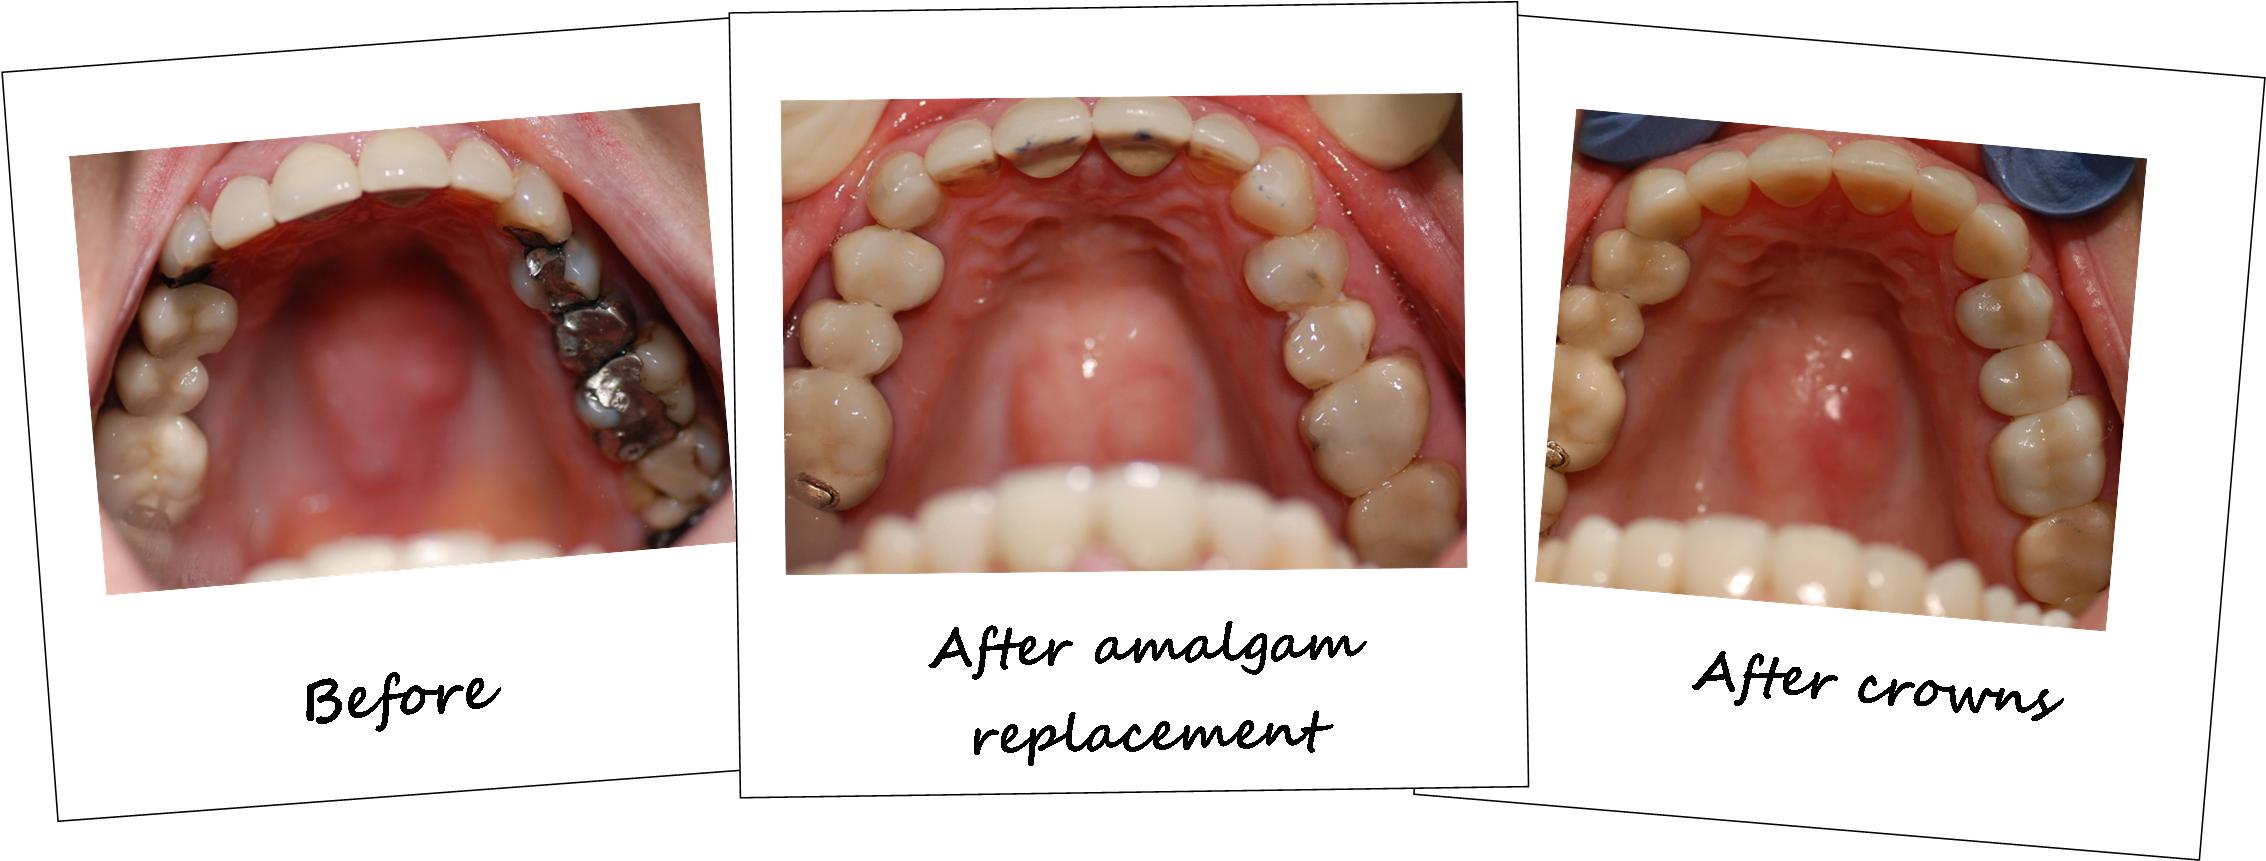 Tooth-colored Composite Fillings To Replace Silver